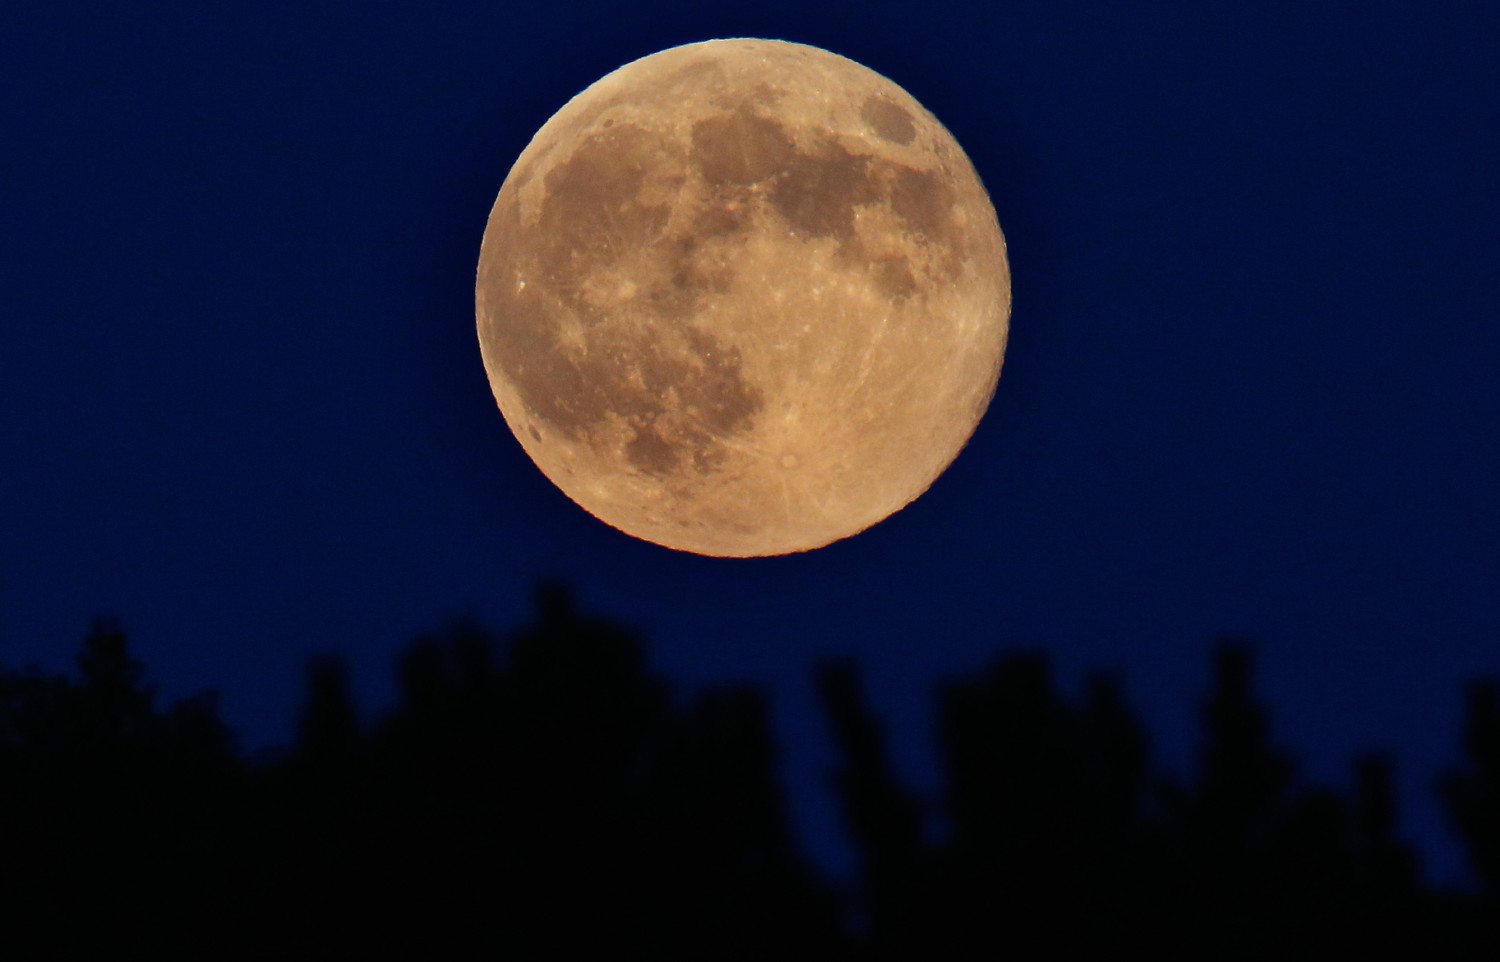 Biggest Supermoon Of 2014 Lights Up The Sky